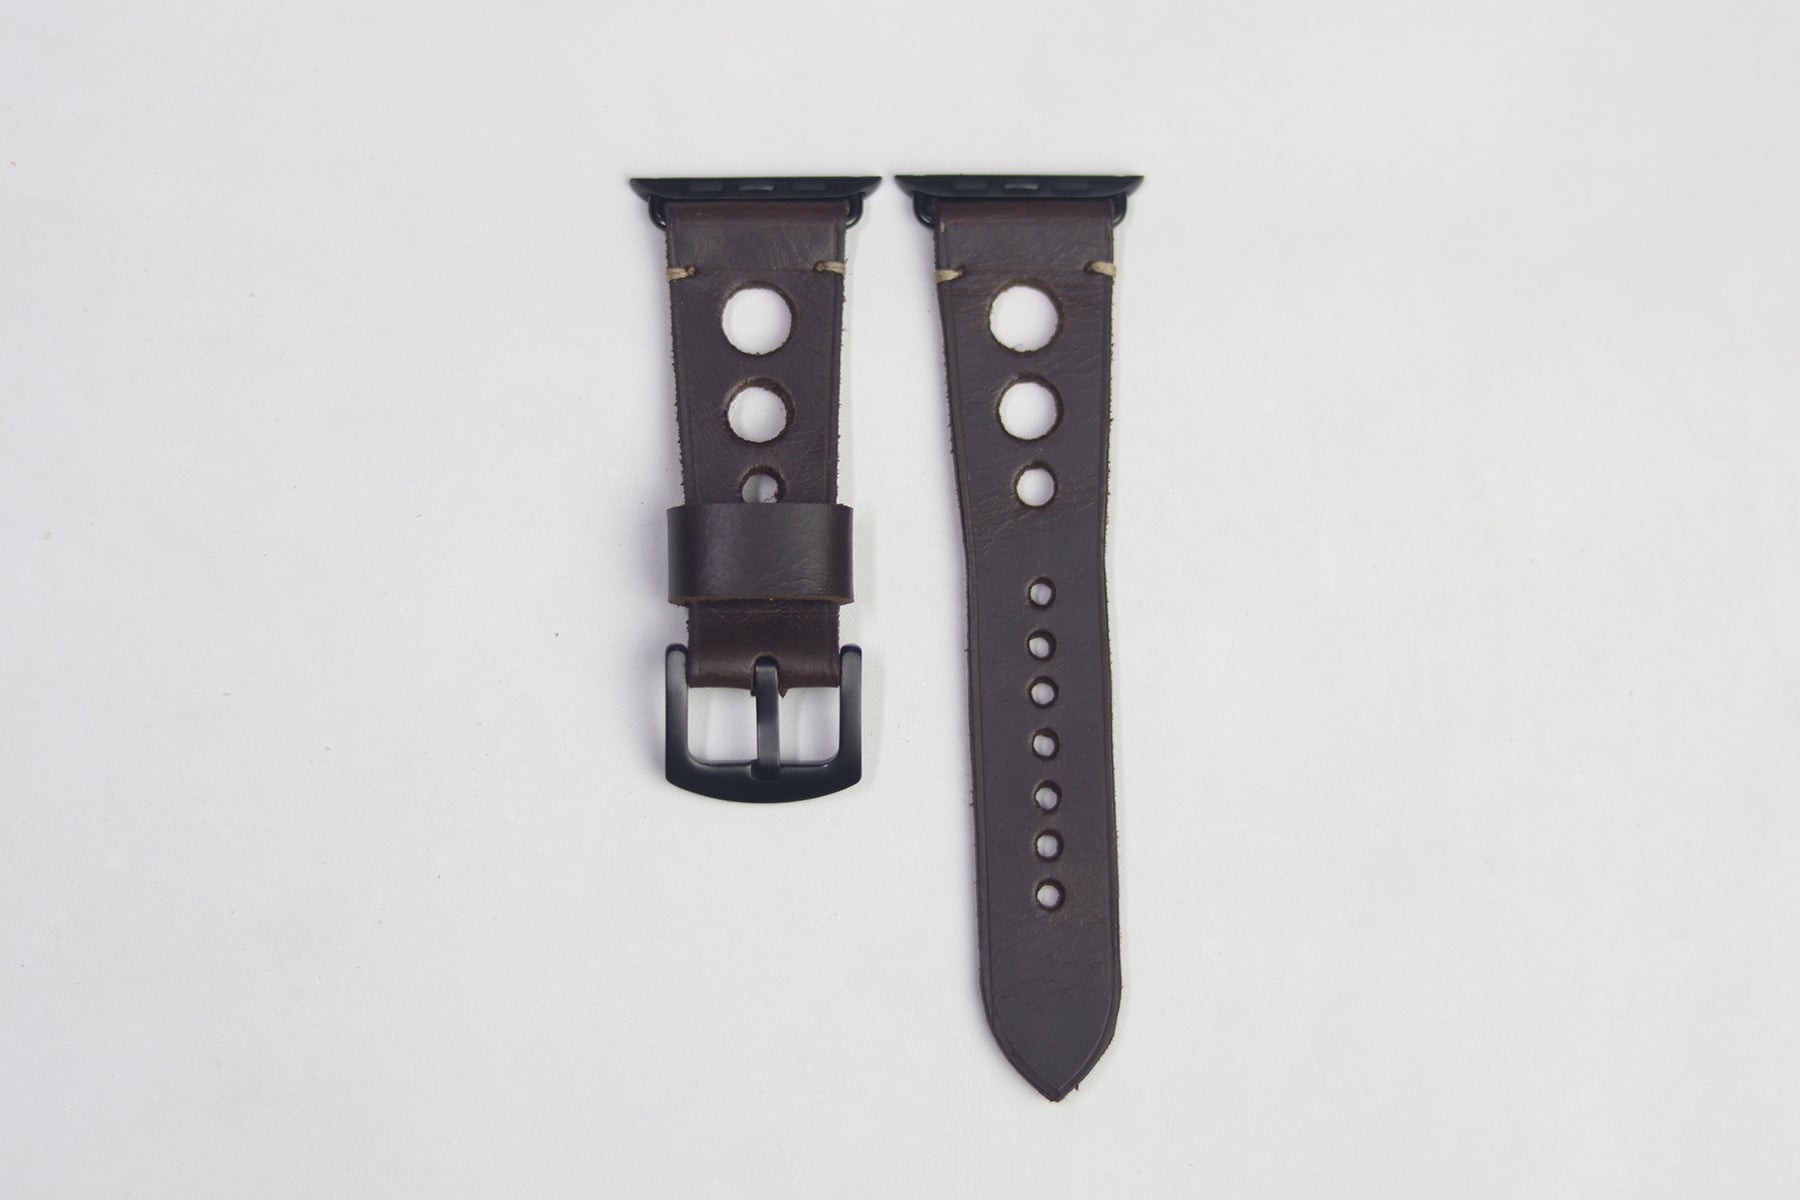 CHOCOLATE BROWN HAND-CRAFTED APPLE WATCH STRAPS